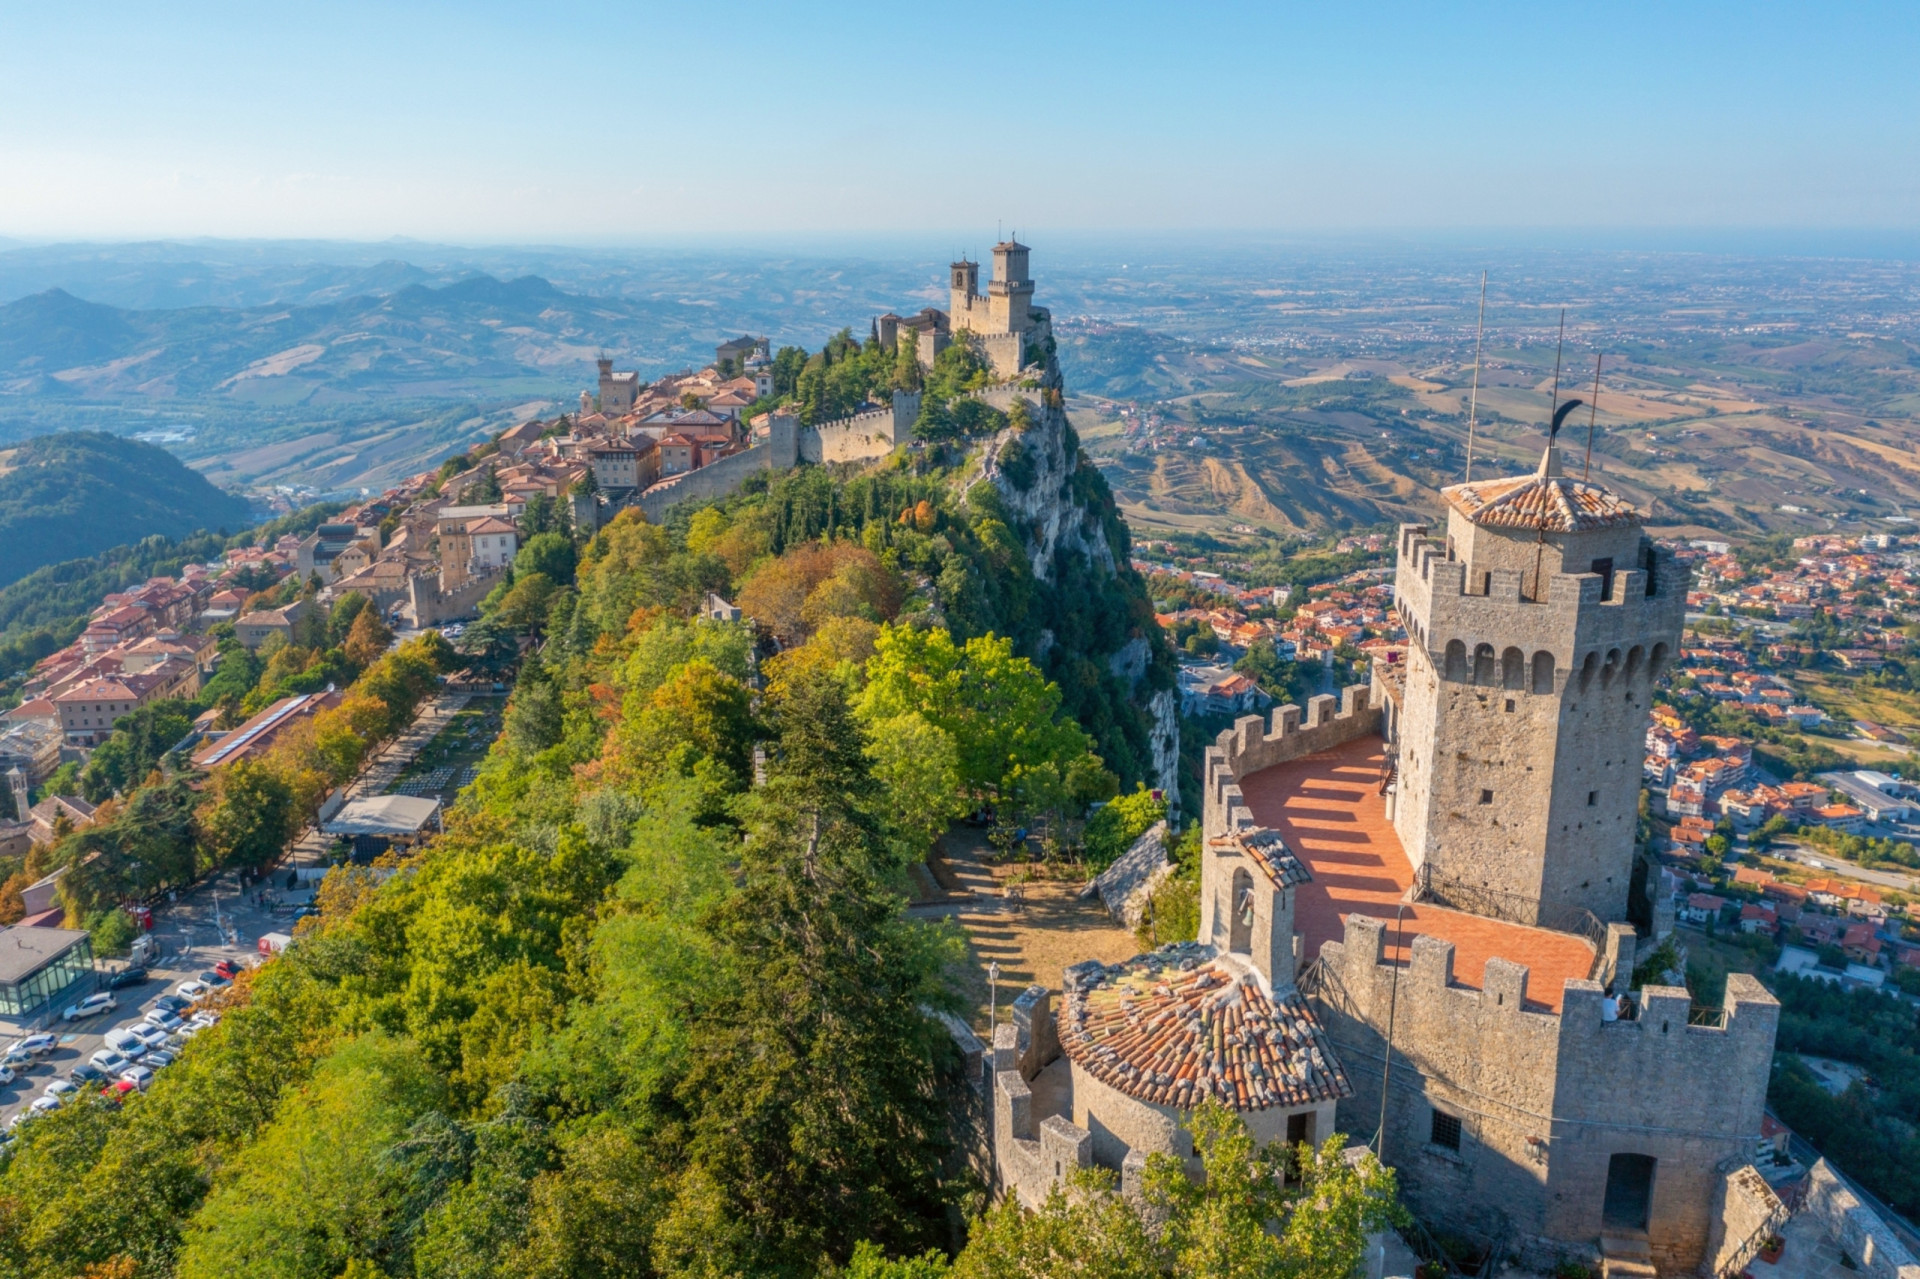 <p>The oldest country in the world is San Marino. Founded on September 3, 301 CE, this diminutive enclave in the middle of Italy has enjoyed its status as an uninterrupted sovereign state since its independence from the Roman Empire.</p>